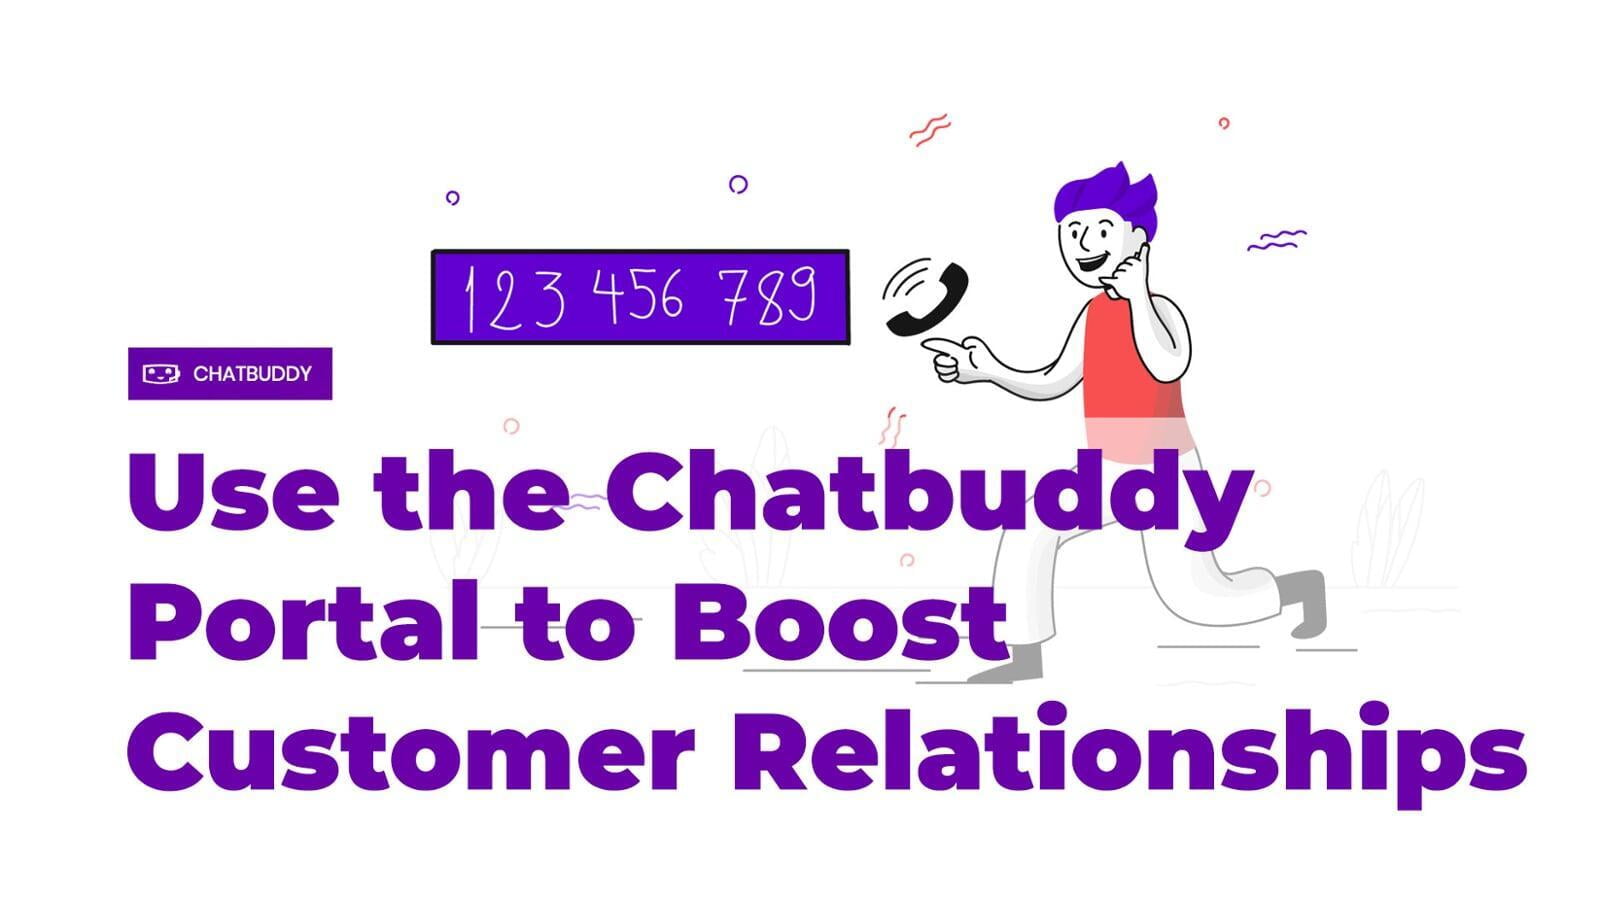 How to Use the Chatbuddy Portal to Boost Customer Relationships